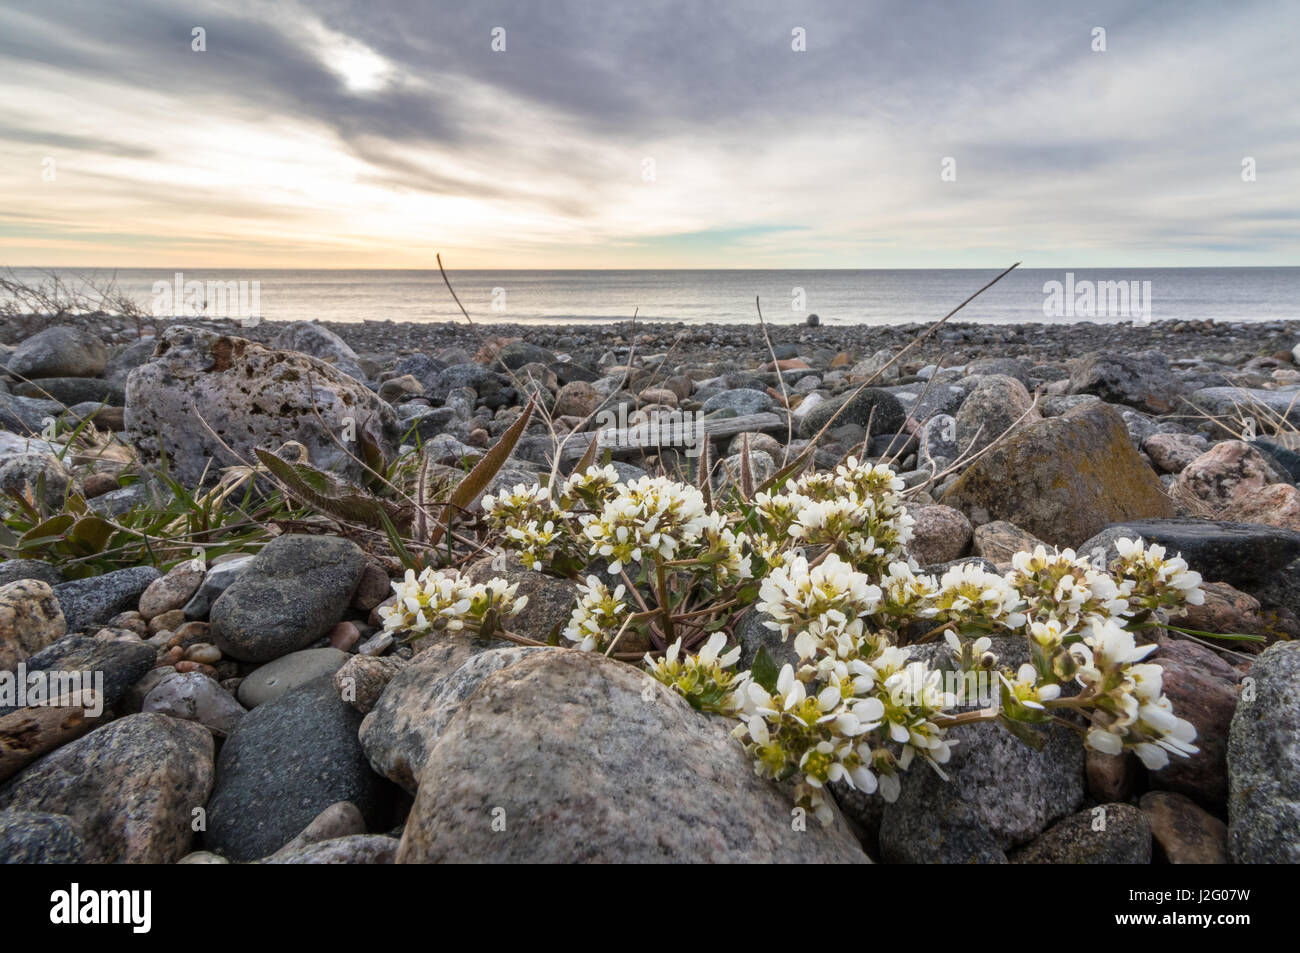 Common Scurvygrass, Cochlearia officinalis, with white flowers, growing on the pebble shore with a view of the sunset over the ocean. The scurvy grass Stock Photo